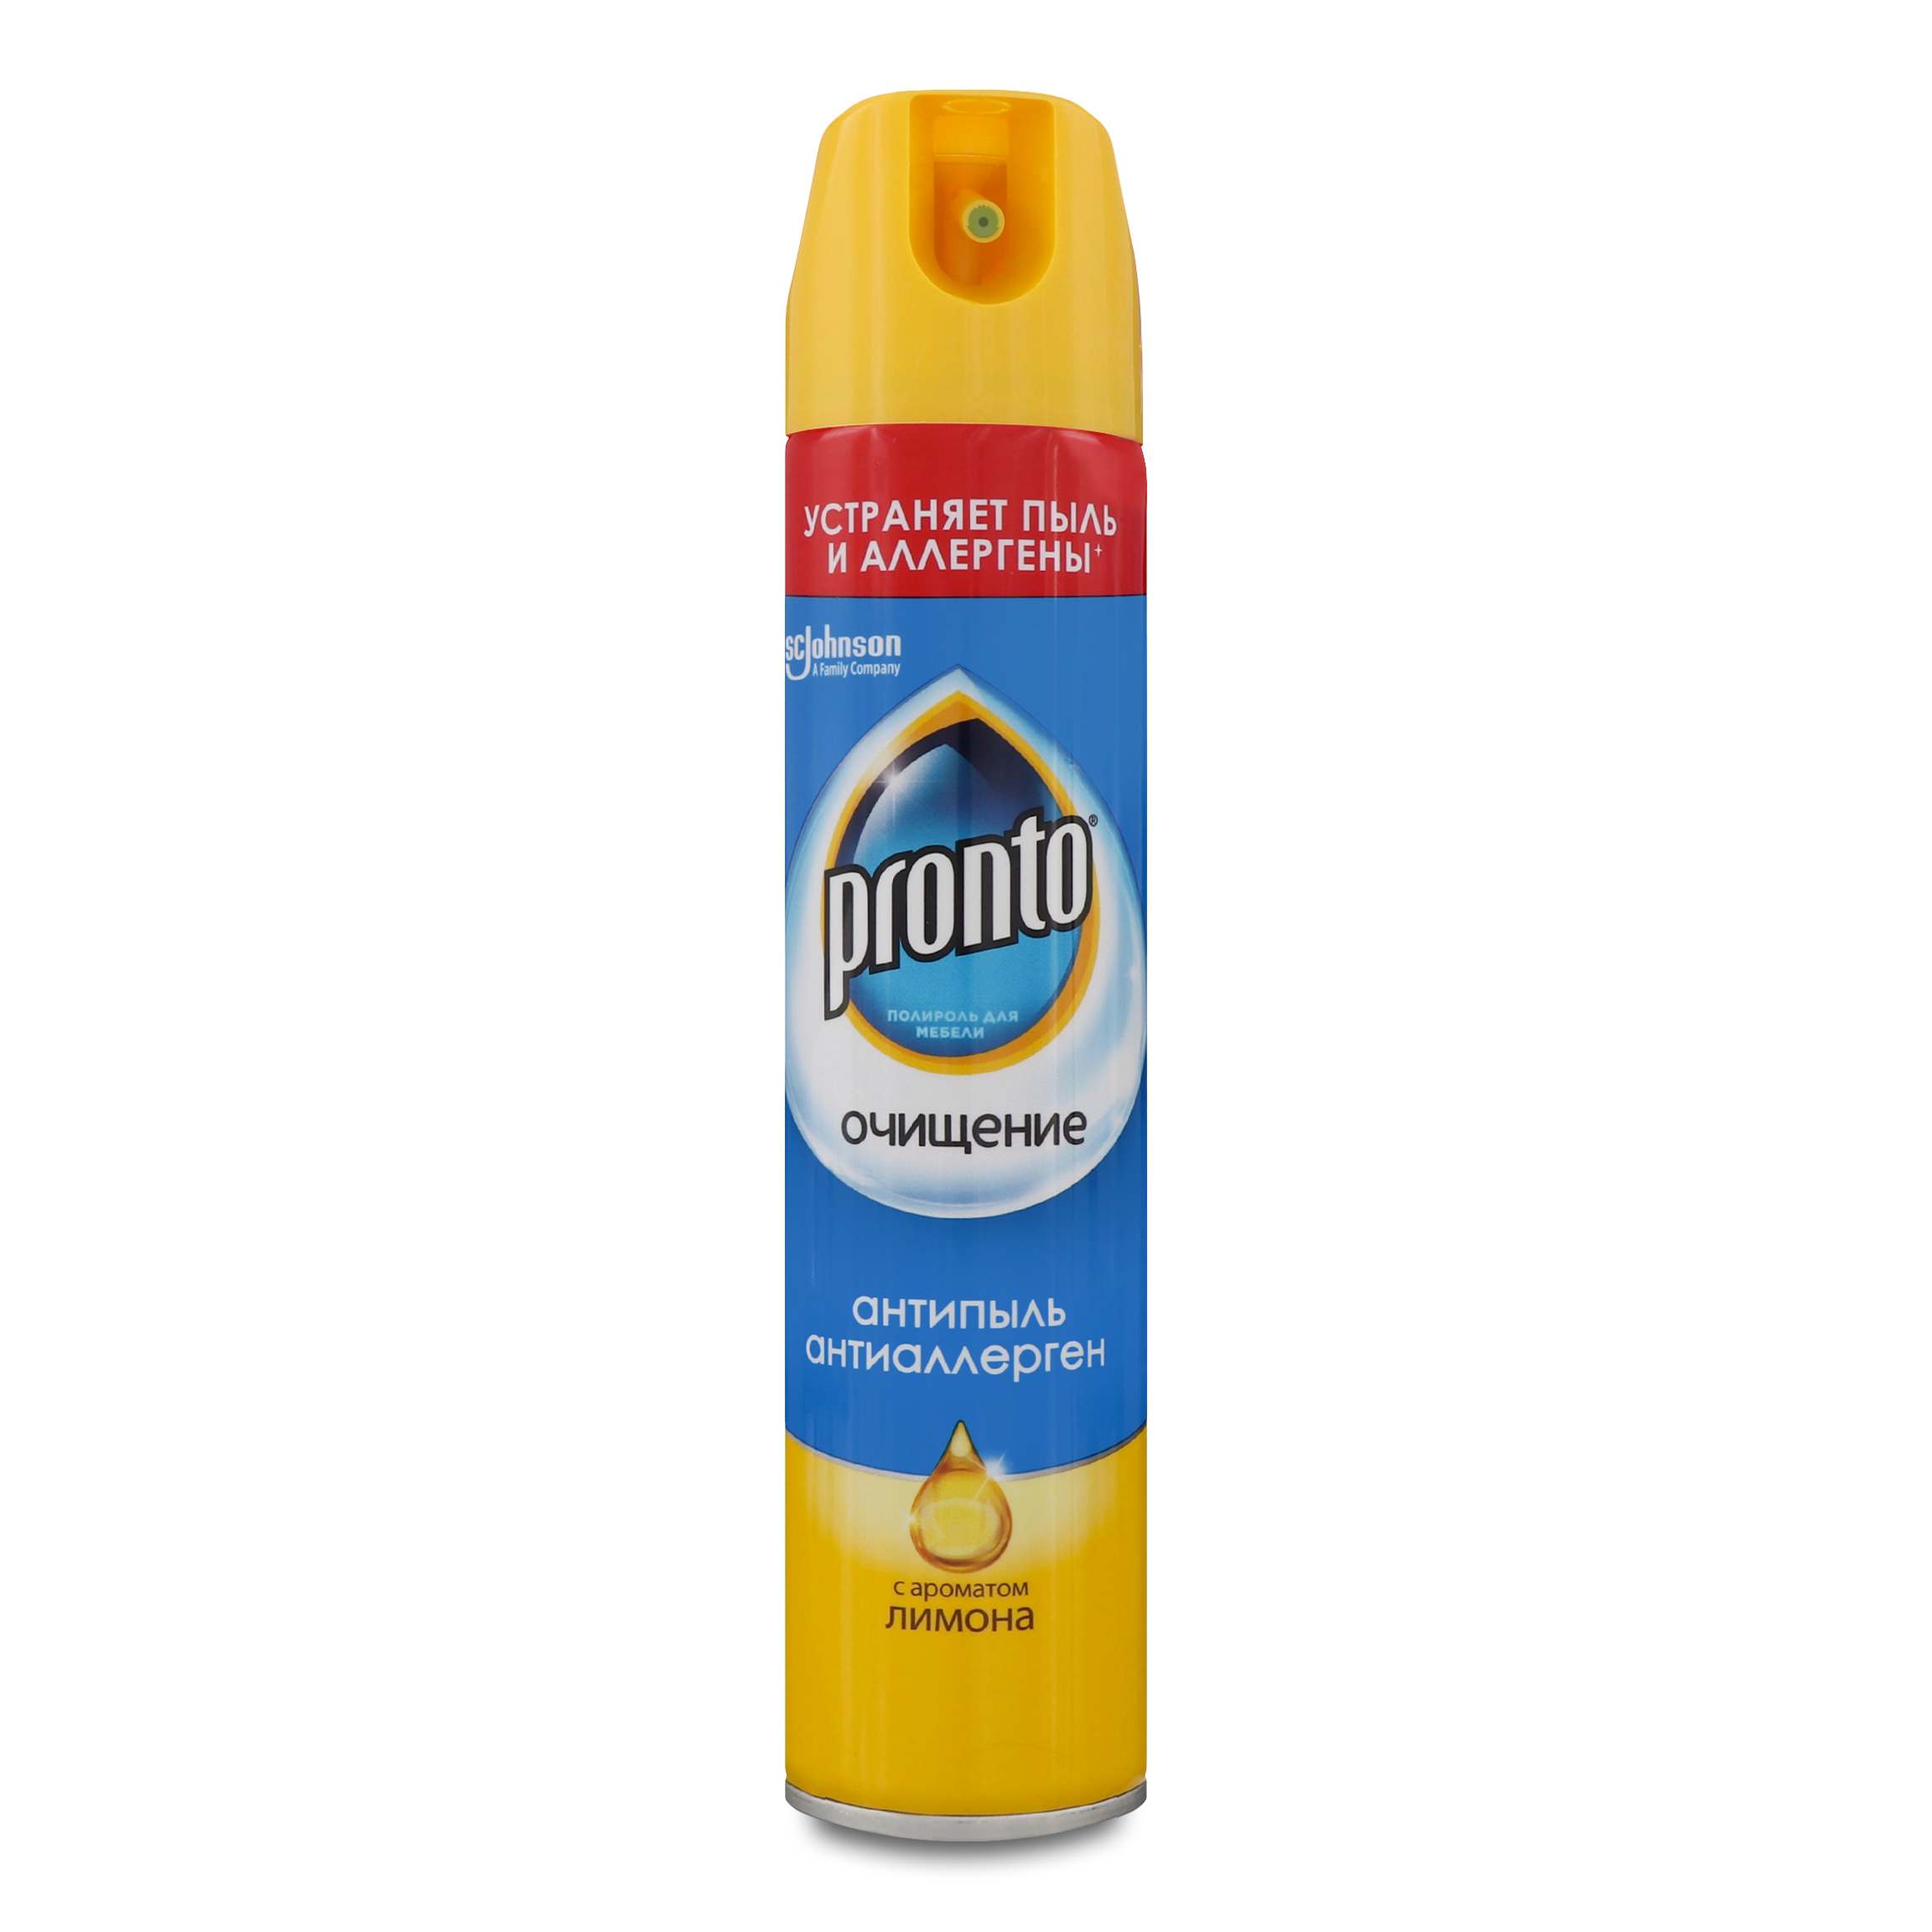 Pronto Polish Antiallergen and Anti-dust for furniture 250ml